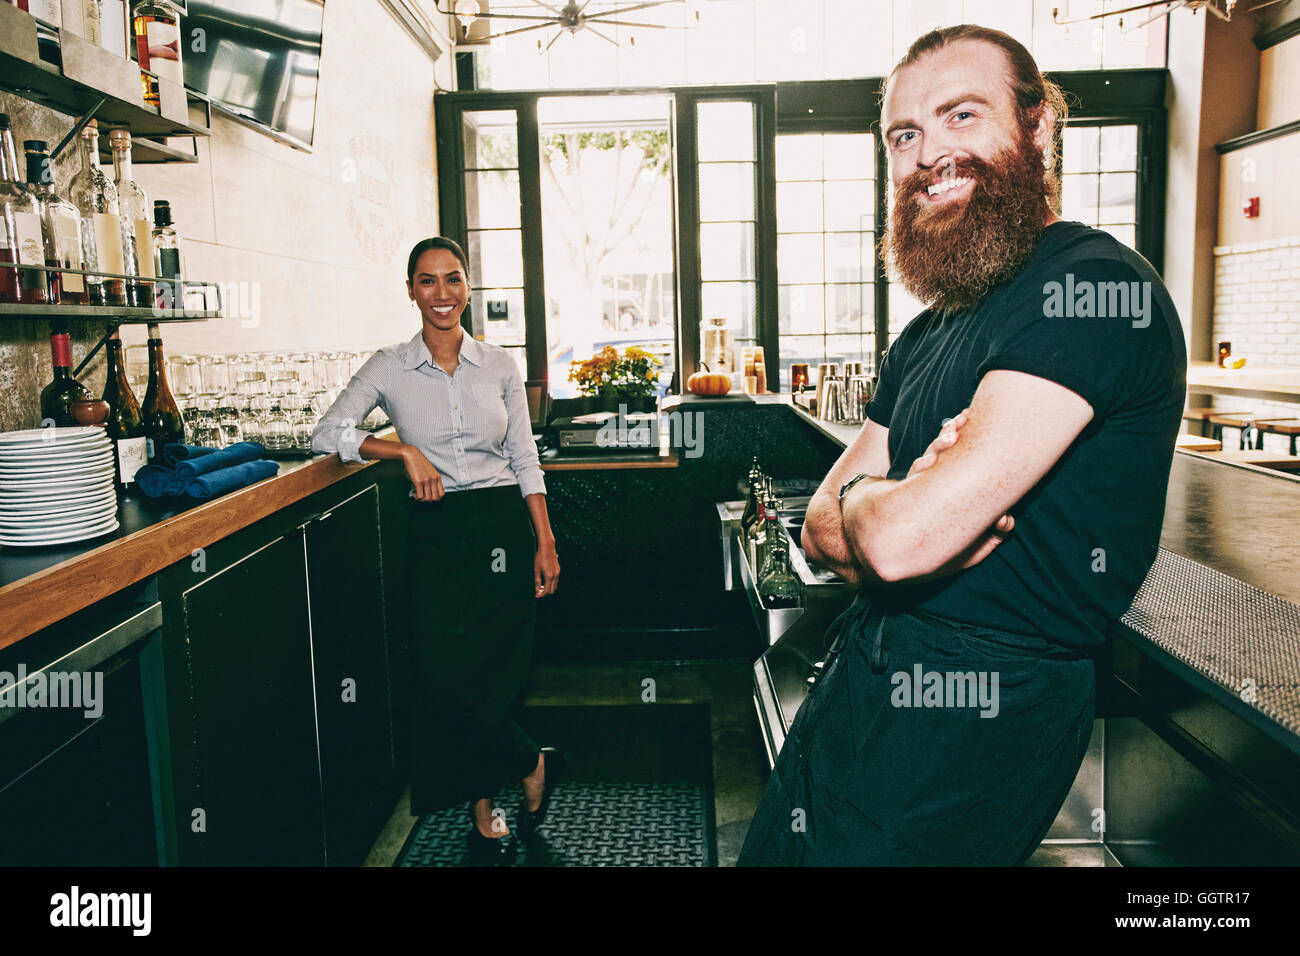 Smiling bartenders relaxing behind bar Stock Photo